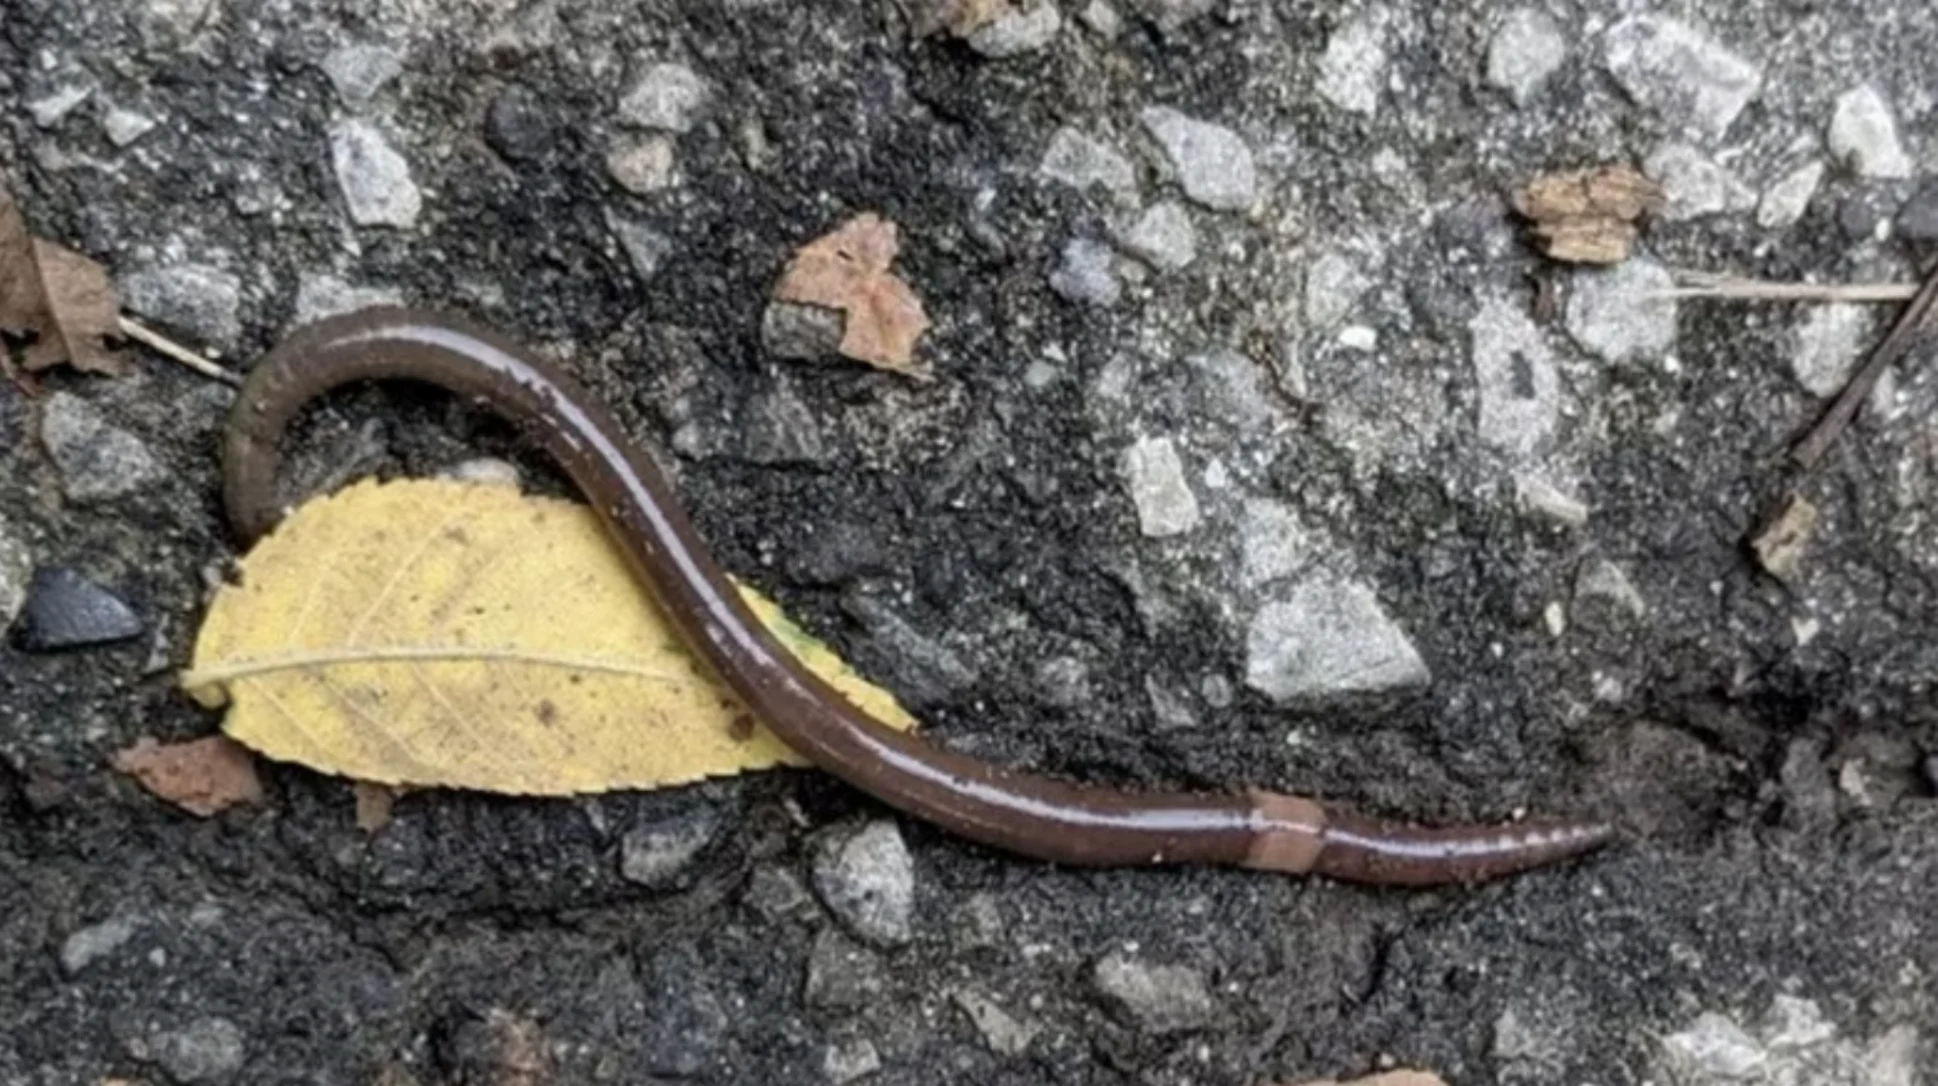 Jumping worms are invading gardens across Toronto. Here's what you should know